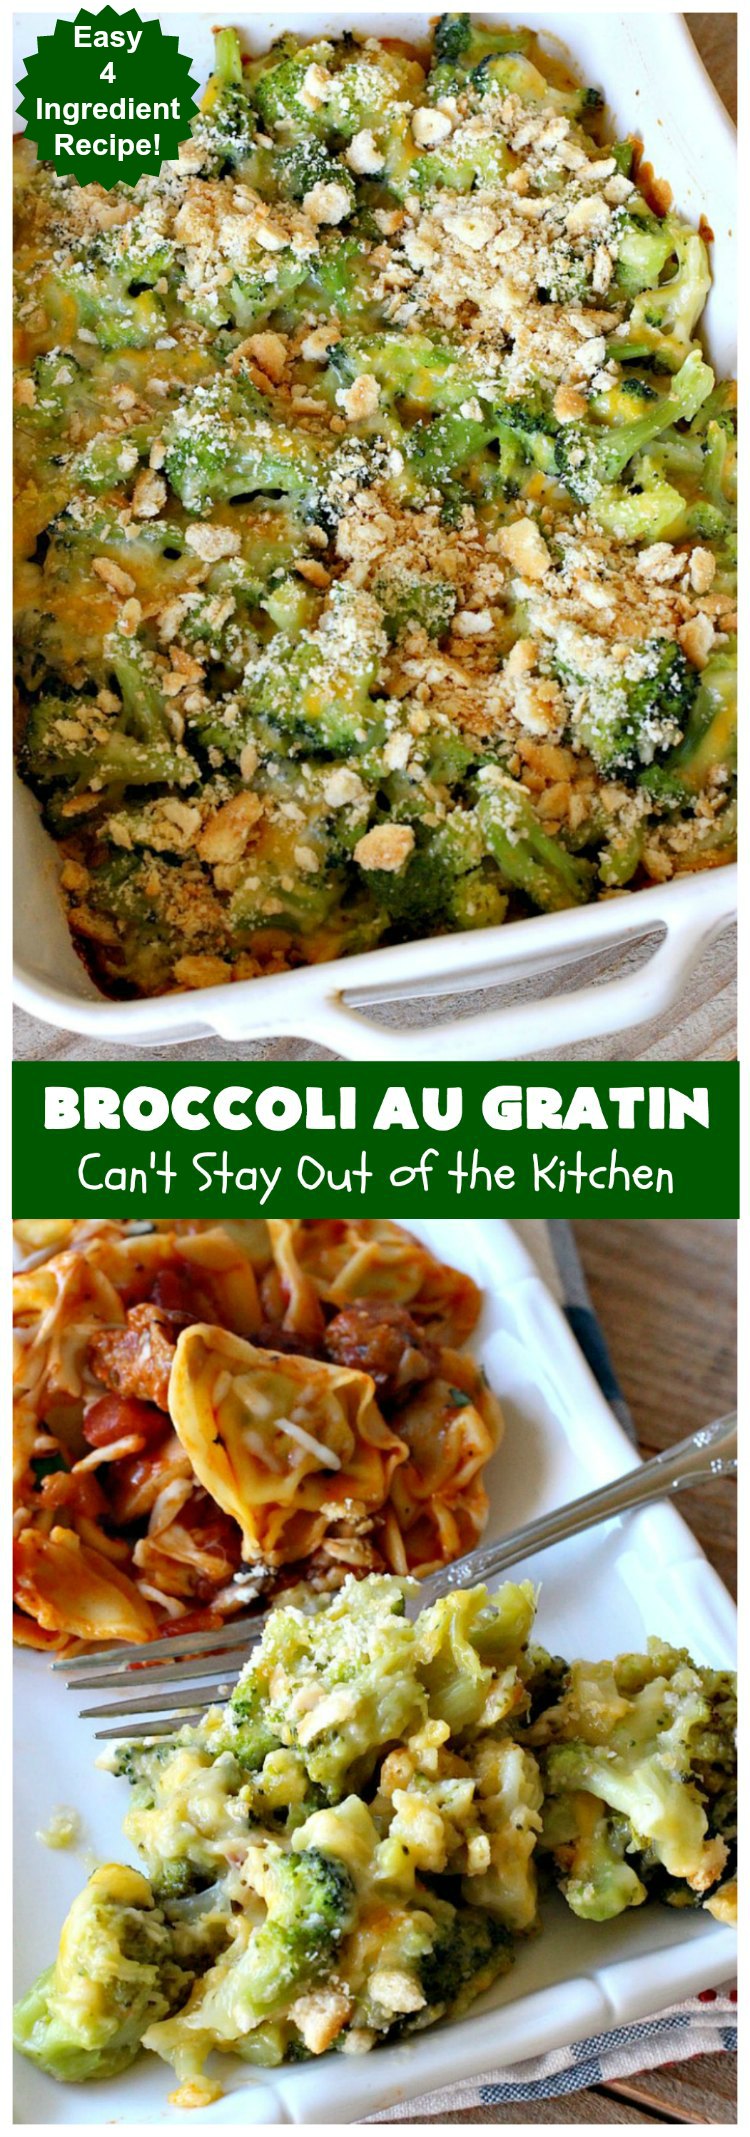 Broccoli Au Gratin | Can't Stay Out of the Kitchen